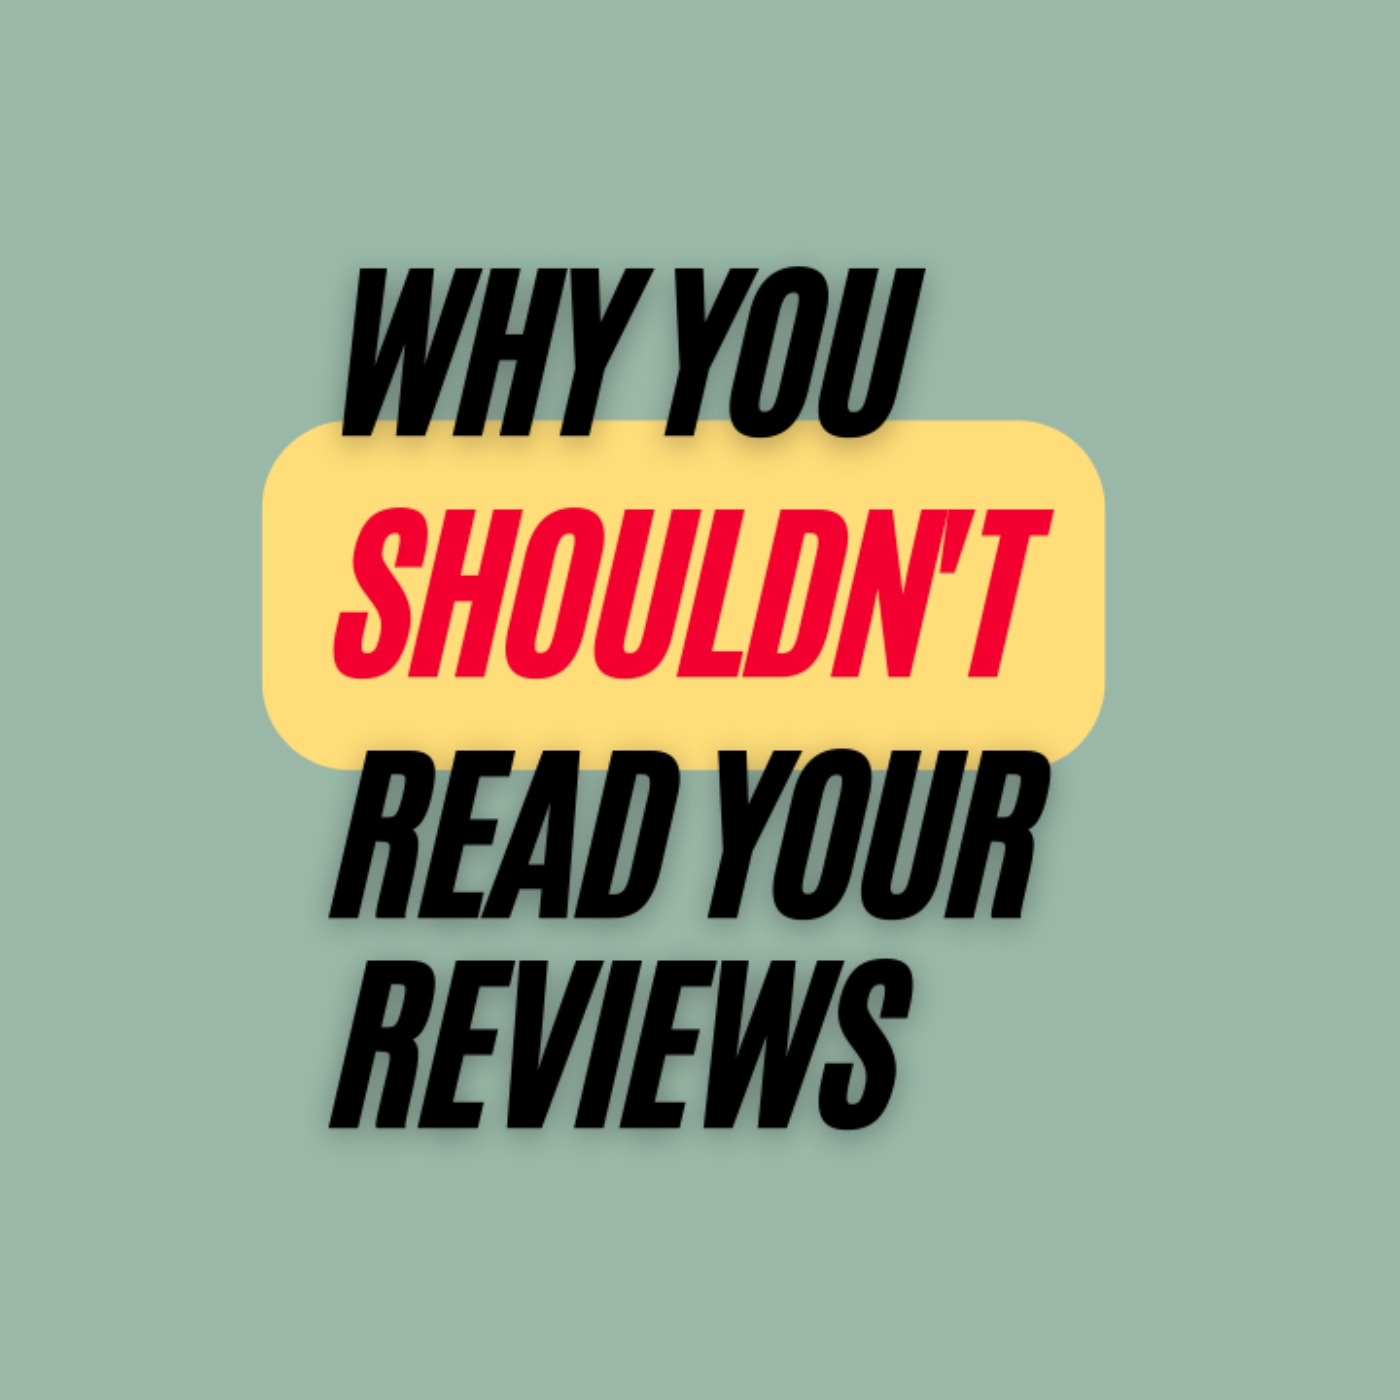 Ep. 354: Leslie Karst on Why You Shouldn’t Read Reviews